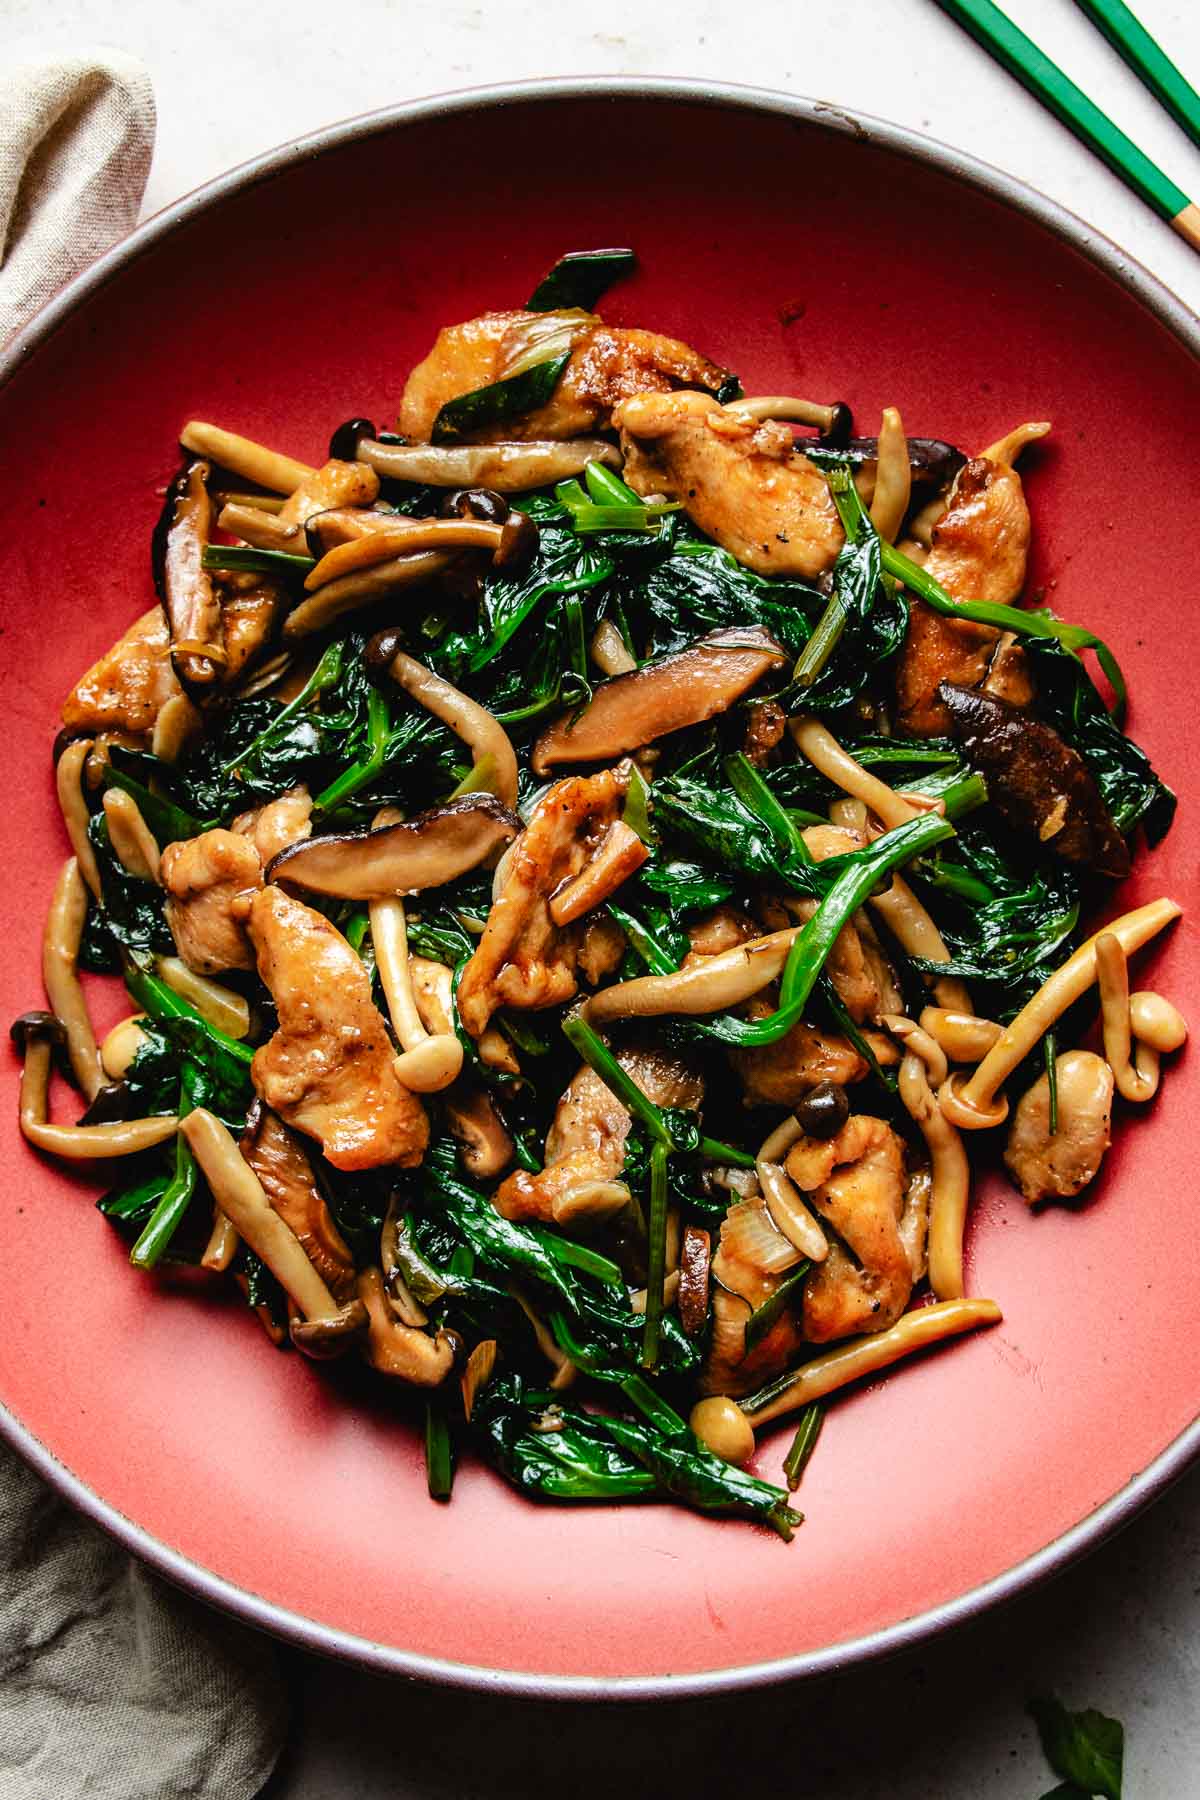 Image shows chicken breast stir fried with oyster sauce with shiitake and snow pea leaves in a red color plate.